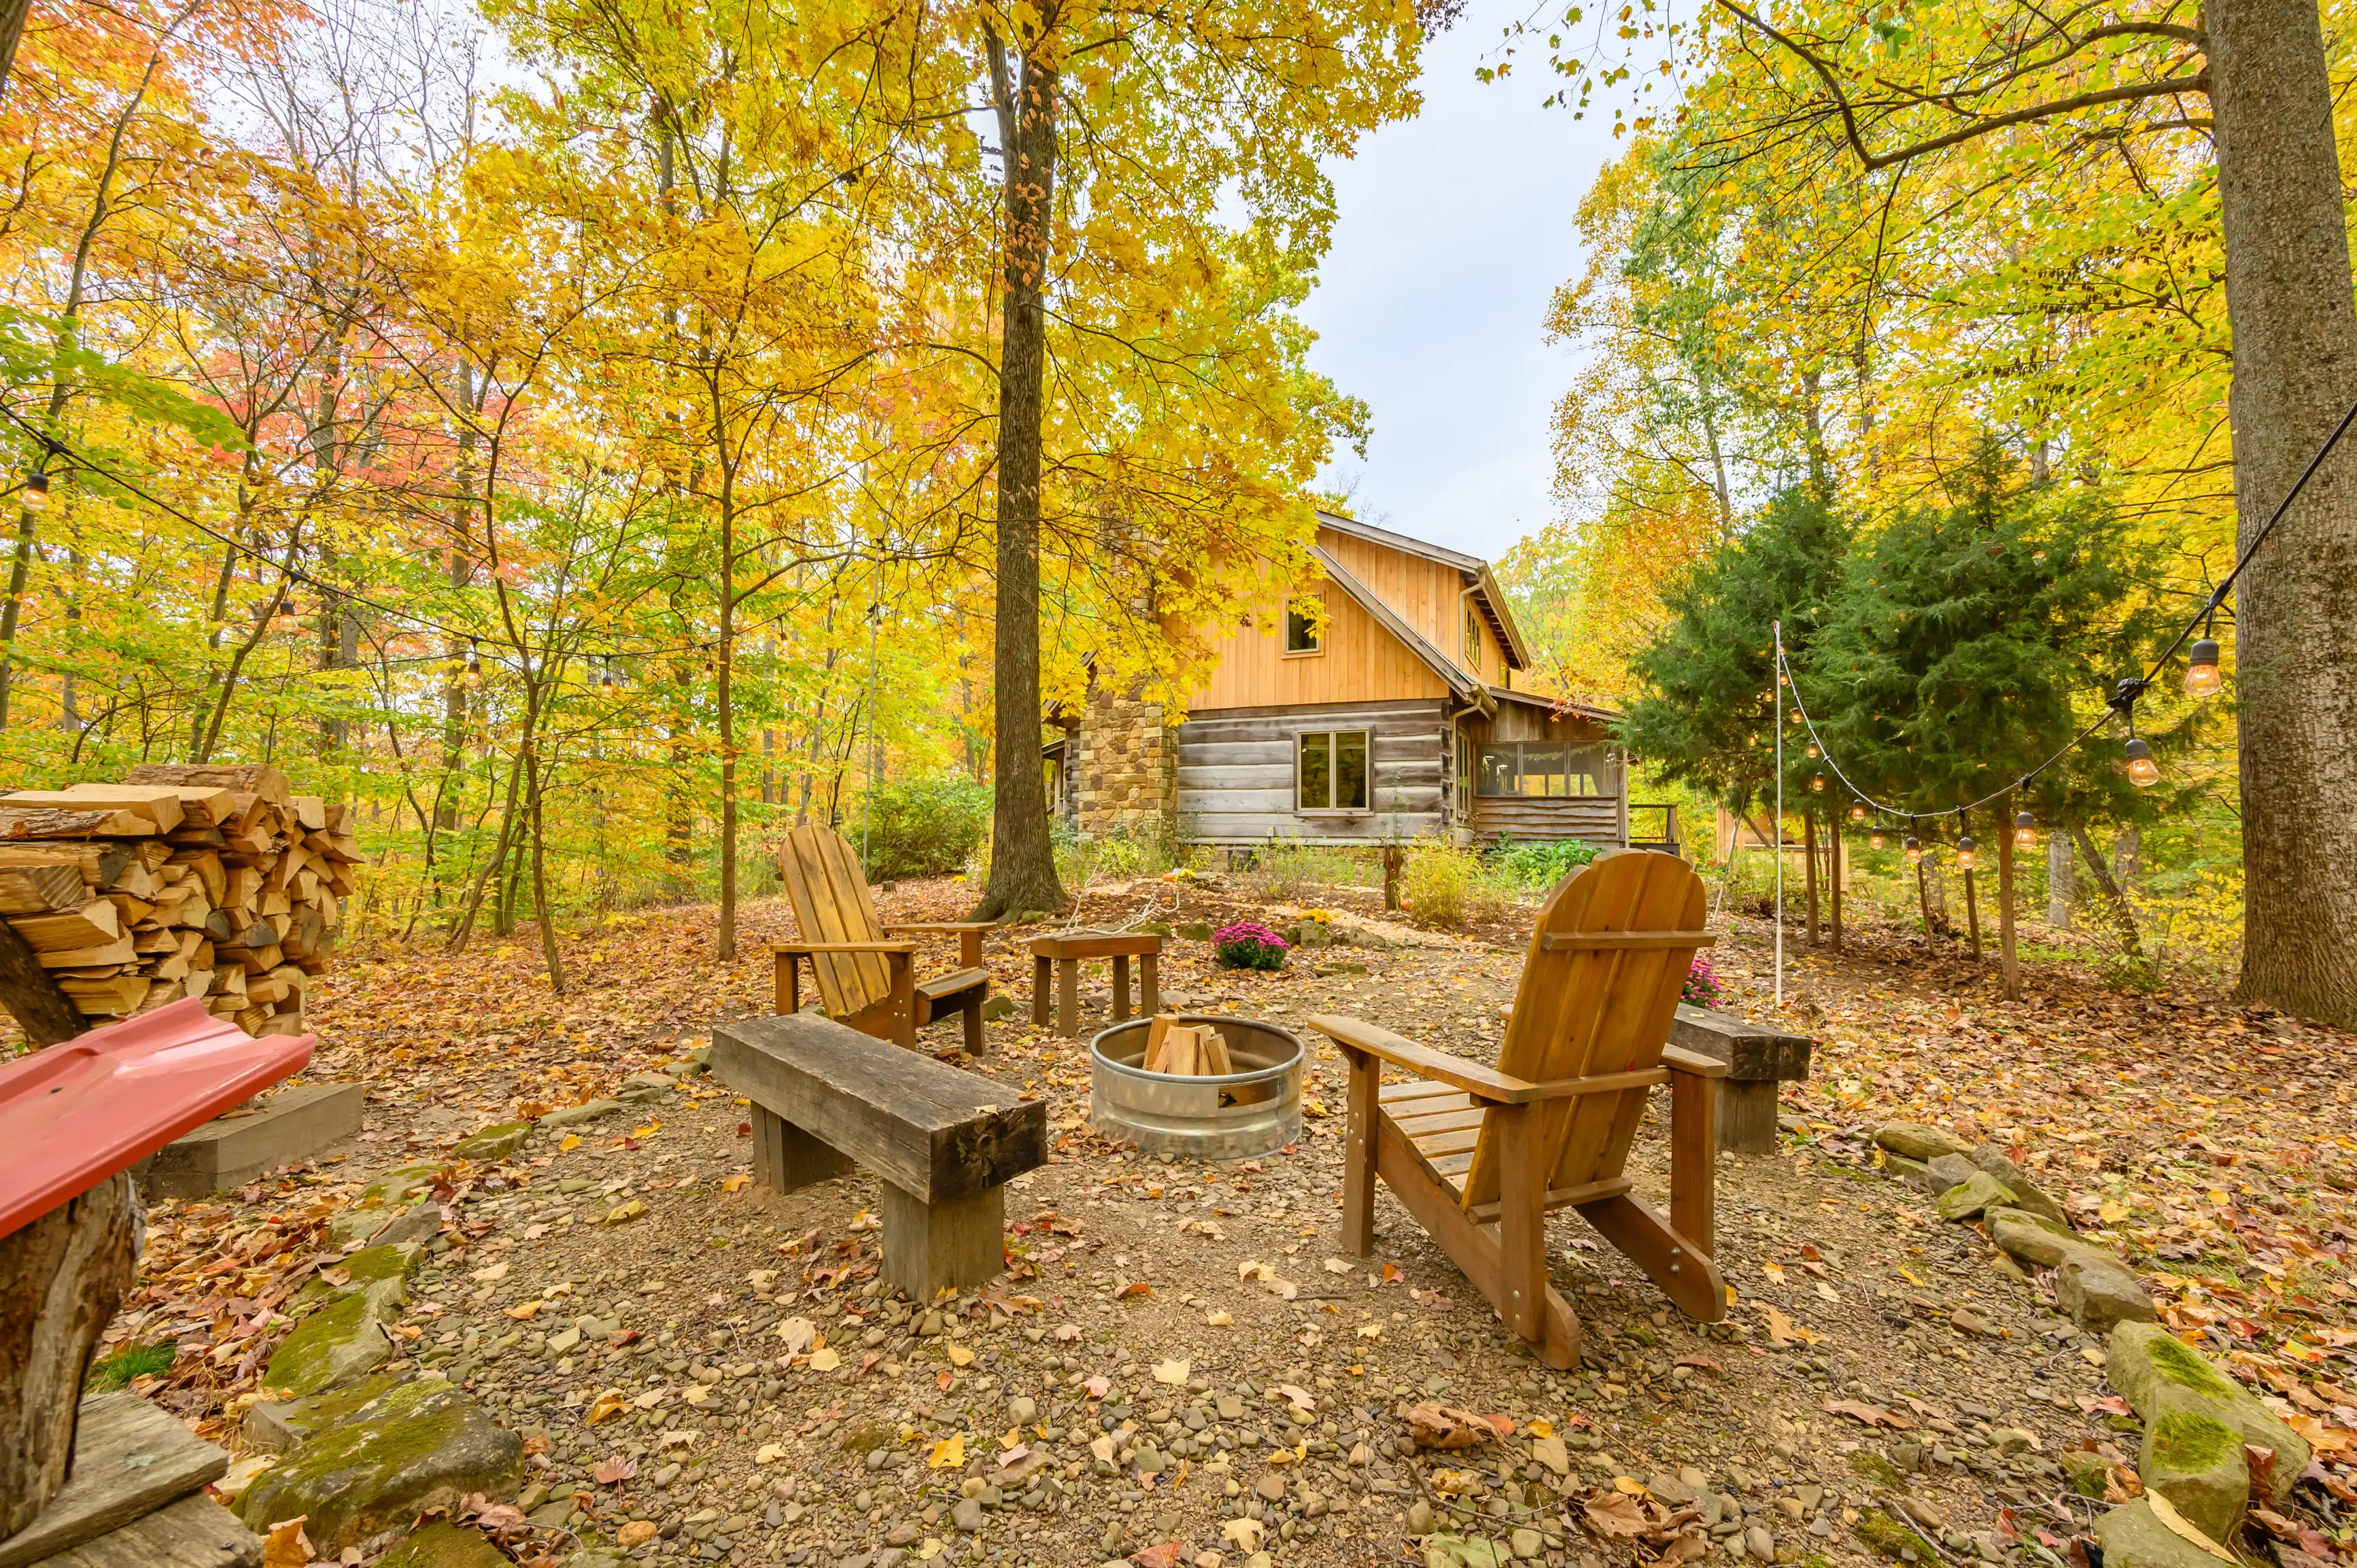 Rustic cabin surrounded by autumn-colored trees, featuring an outdoor seating area with Adirondack chairs and a fire pit.